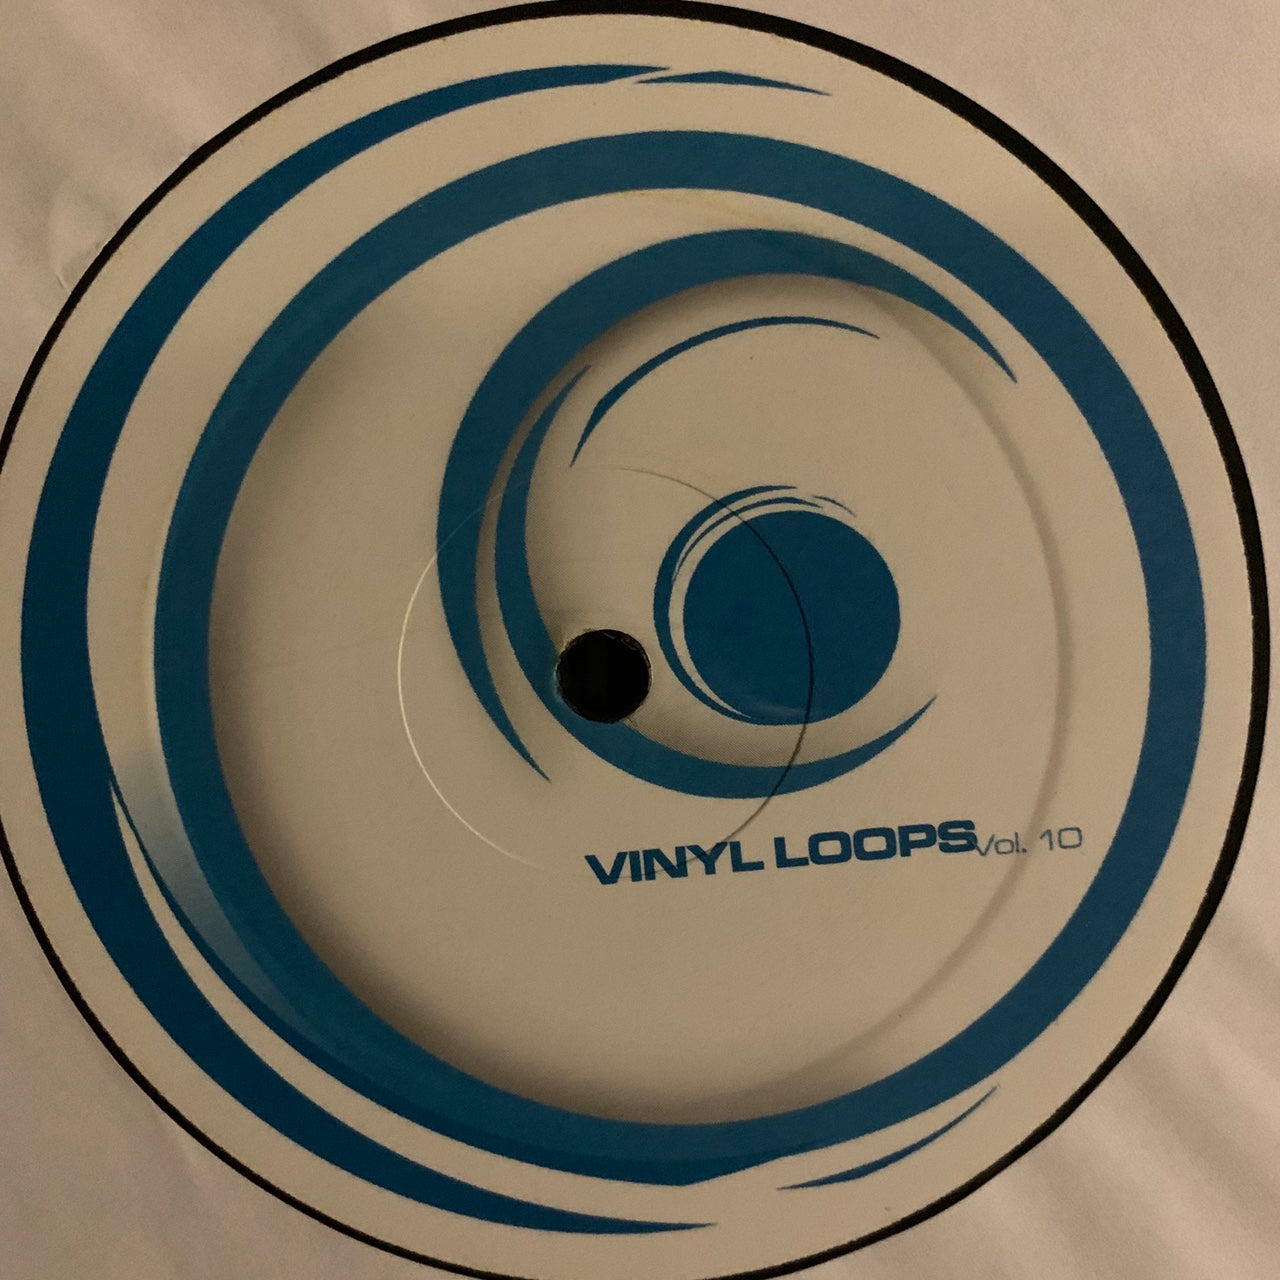 Vinyl Loops Volume 10, Mousse T “I’m Horny” / Phil Fuldner Works “You Can’t Fight What You Feel” / Mark Van Dale “Water Love” 3 Track 12inch Vinyl